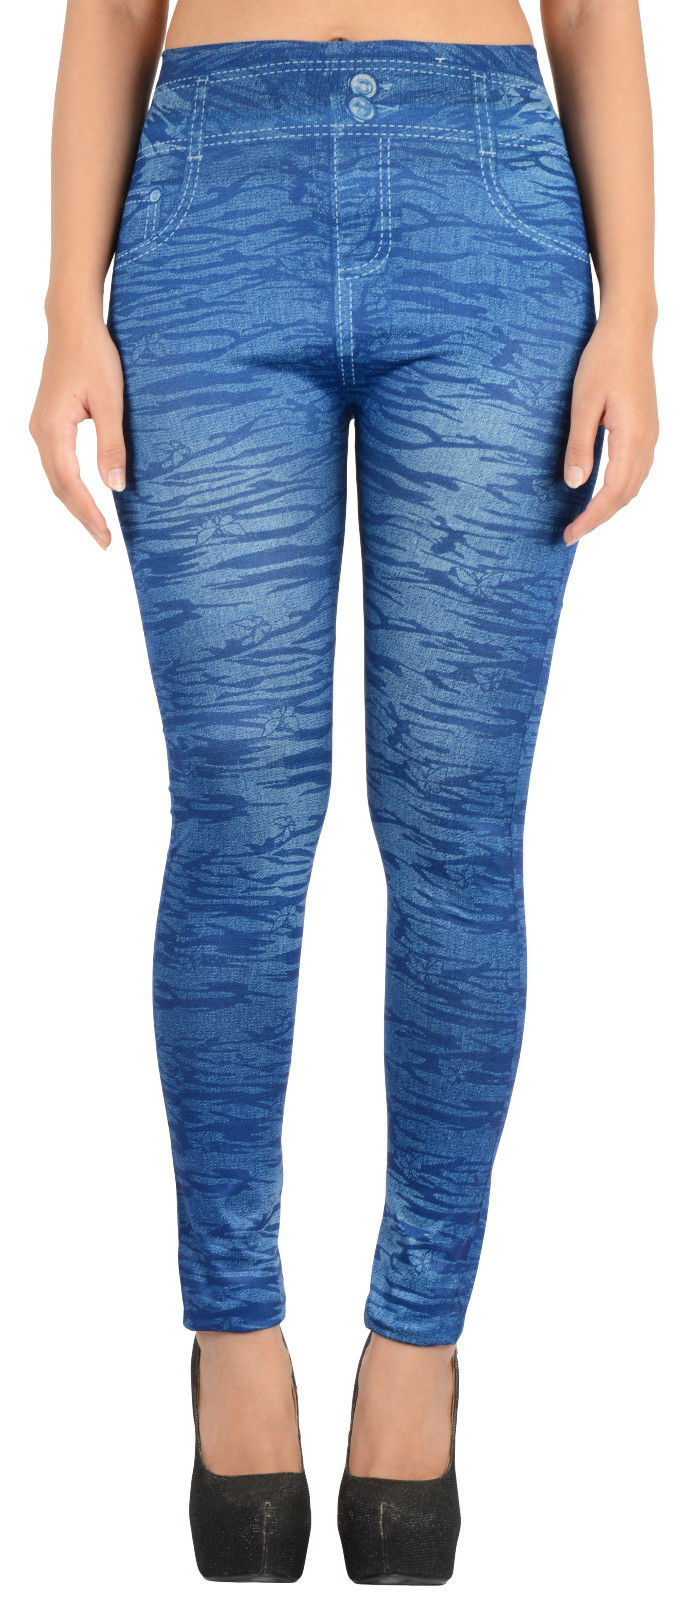 Buy Women's Denim Print Leggings, Very High Waist, Fleece Lined, Black &  Blue, Very Stretchy, Look Like Jeans. One Size Fits Perfectly 10-18 Online  in India - Etsy